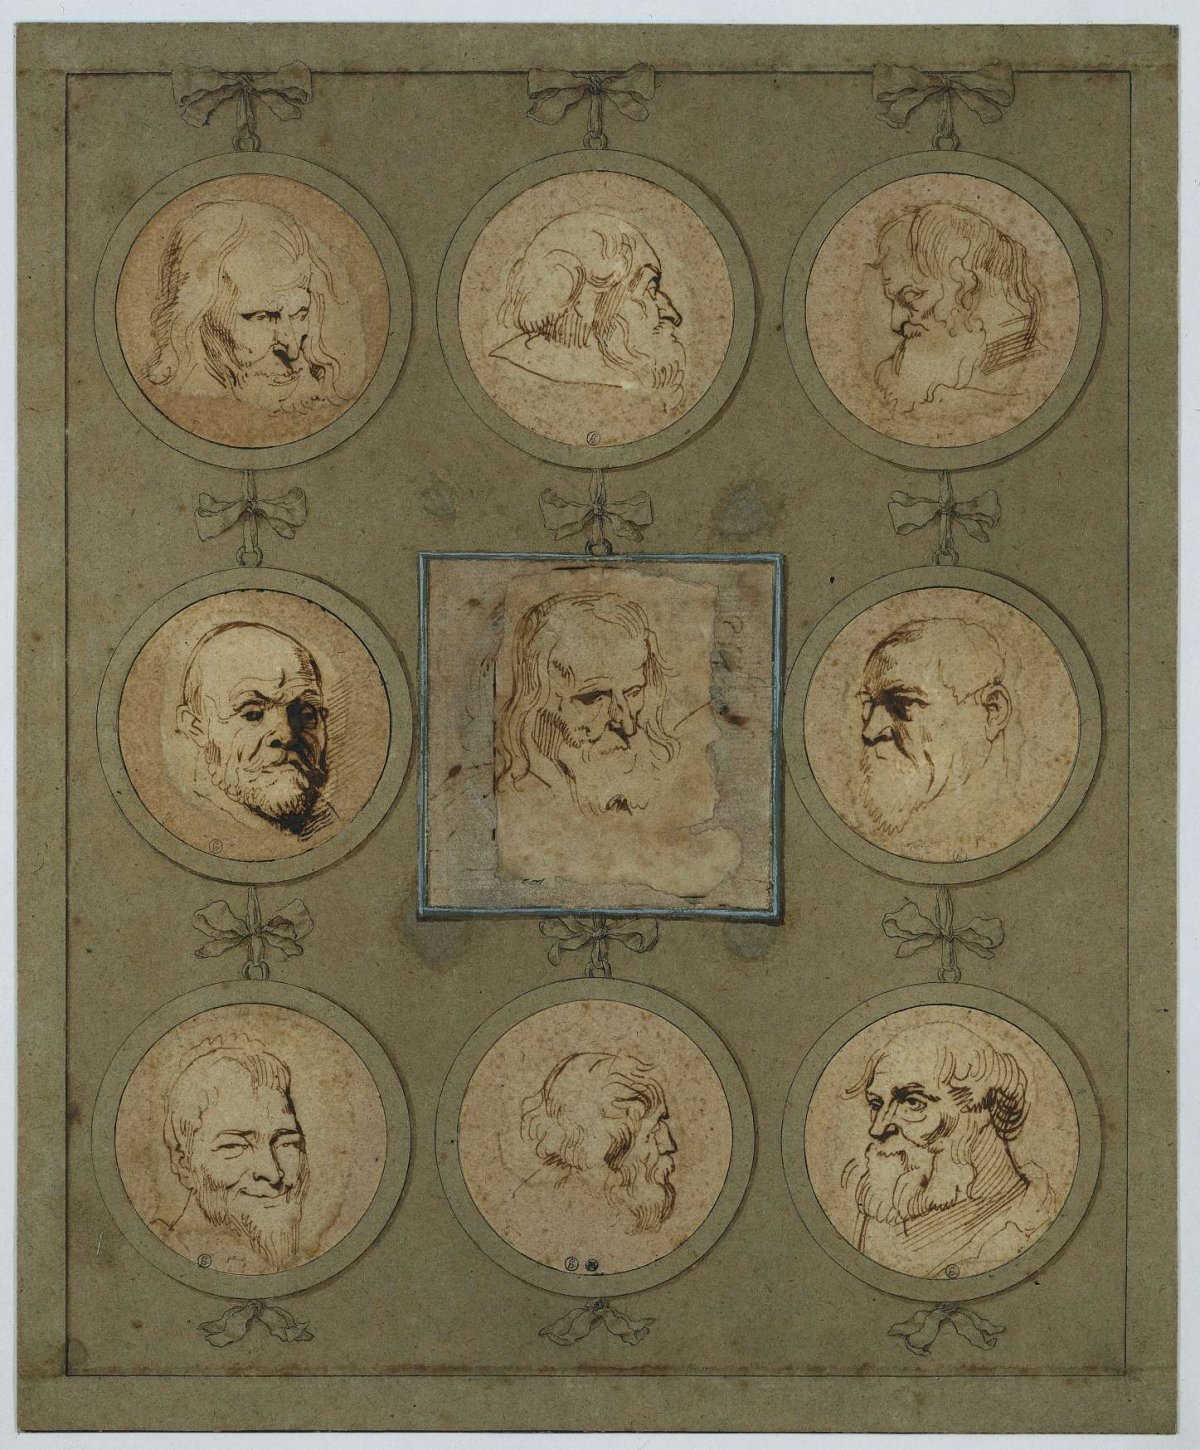 Collection sheet with nine study heads in medallions, Anthony van Dyck, 1610 - 1641